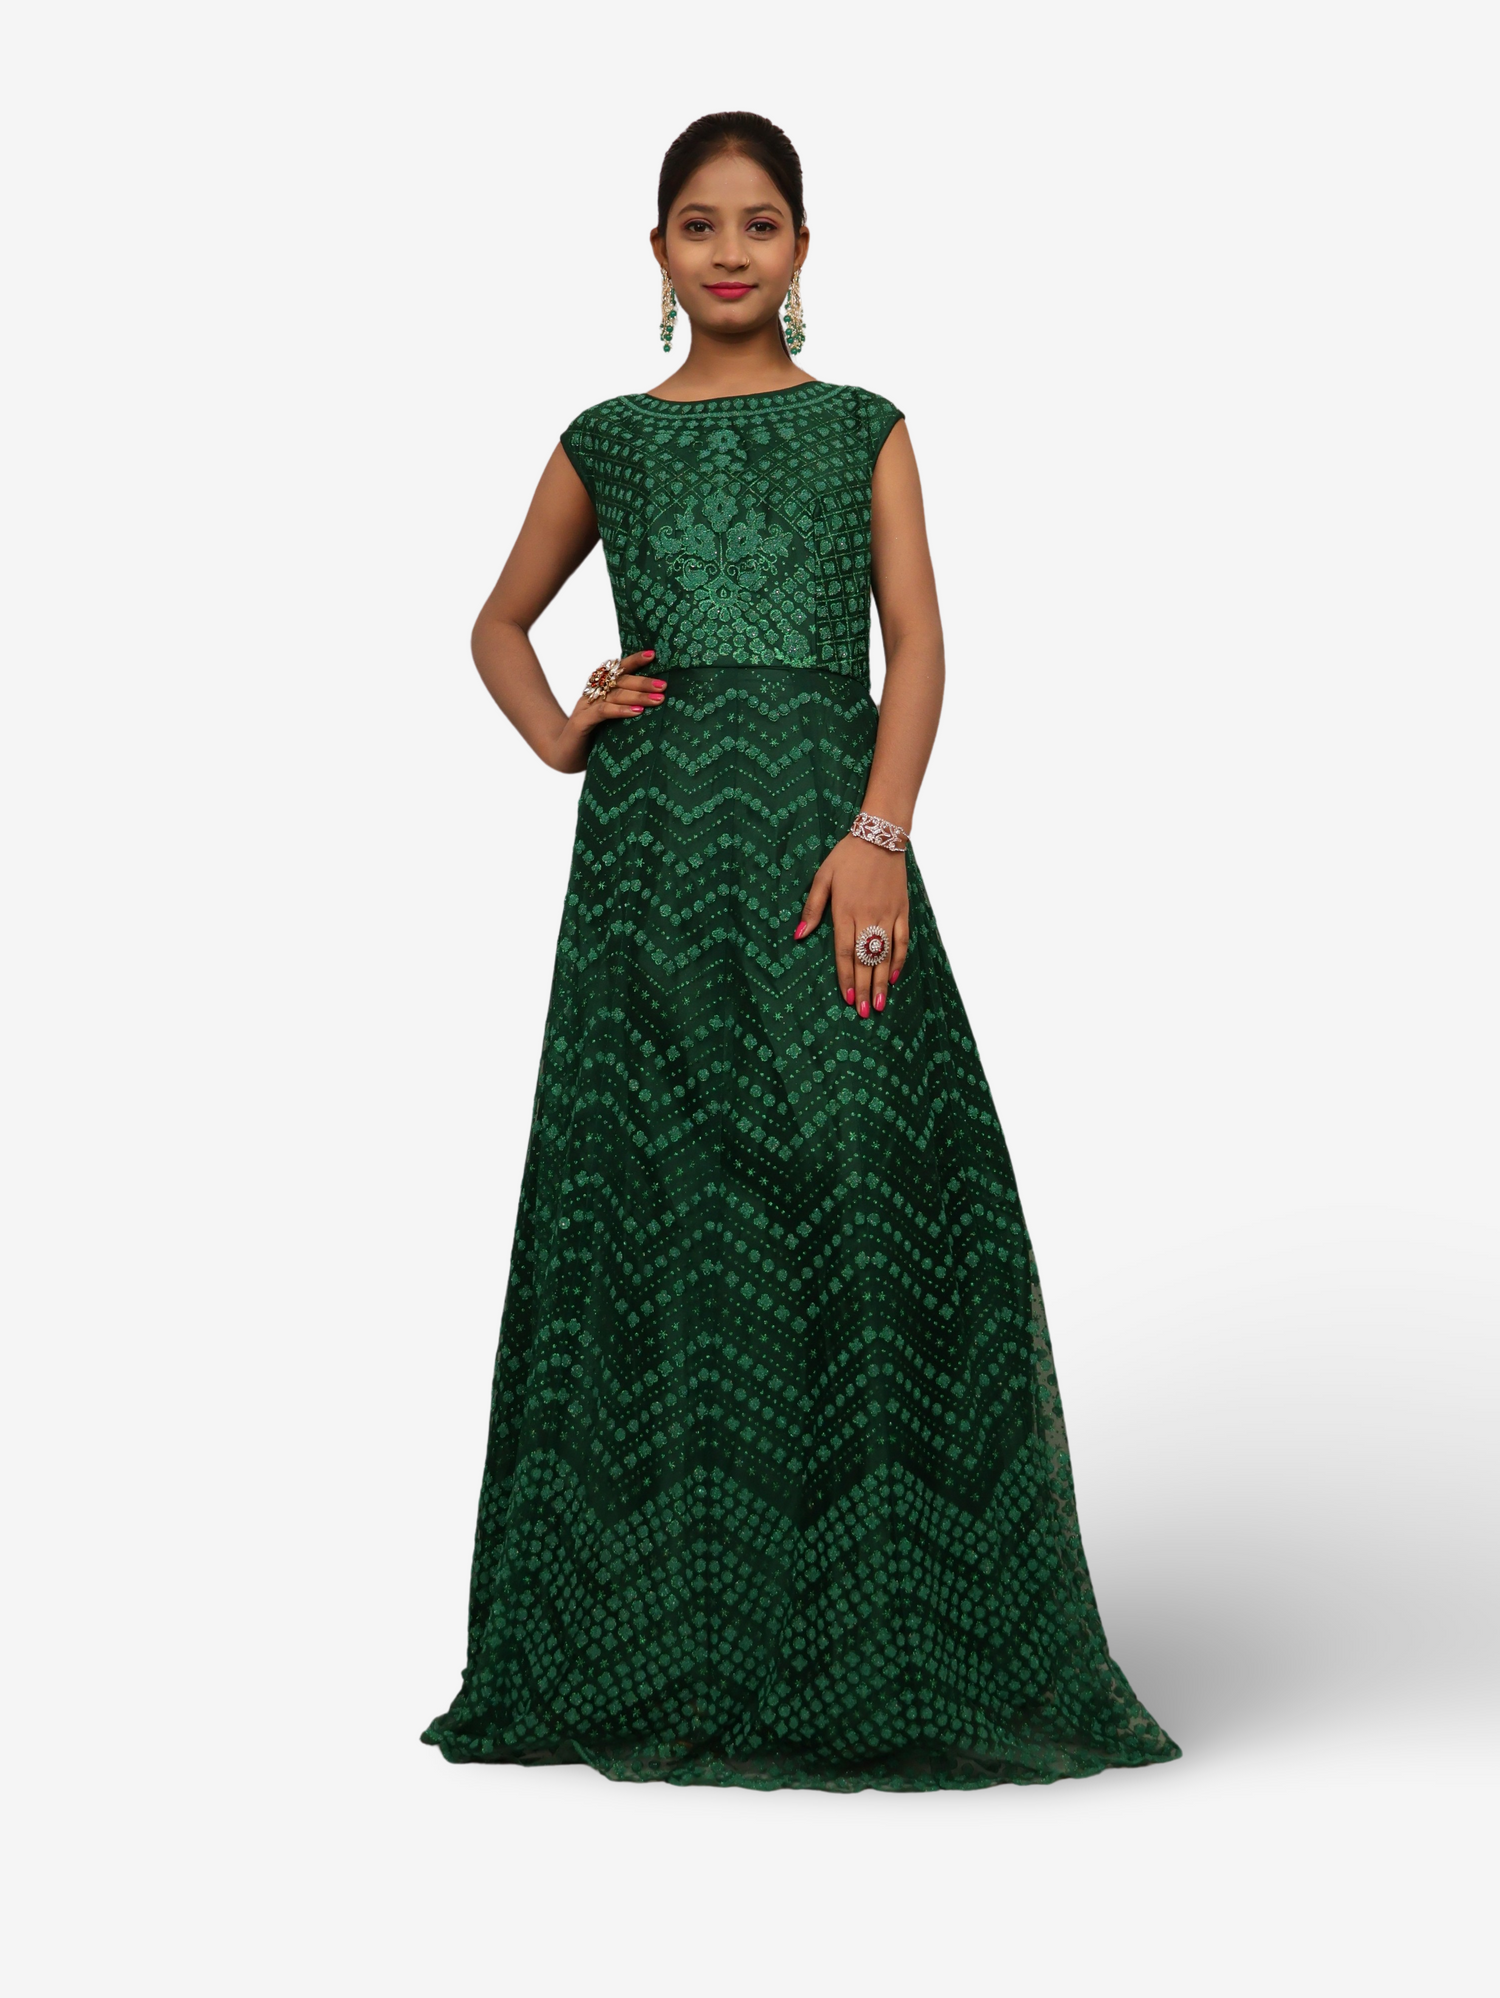 Gown with Glitter &amp; Shimmery effect for Women by Shreekama Dark Green Designer Gowns for Party Festival Wedding Occasion in Noida